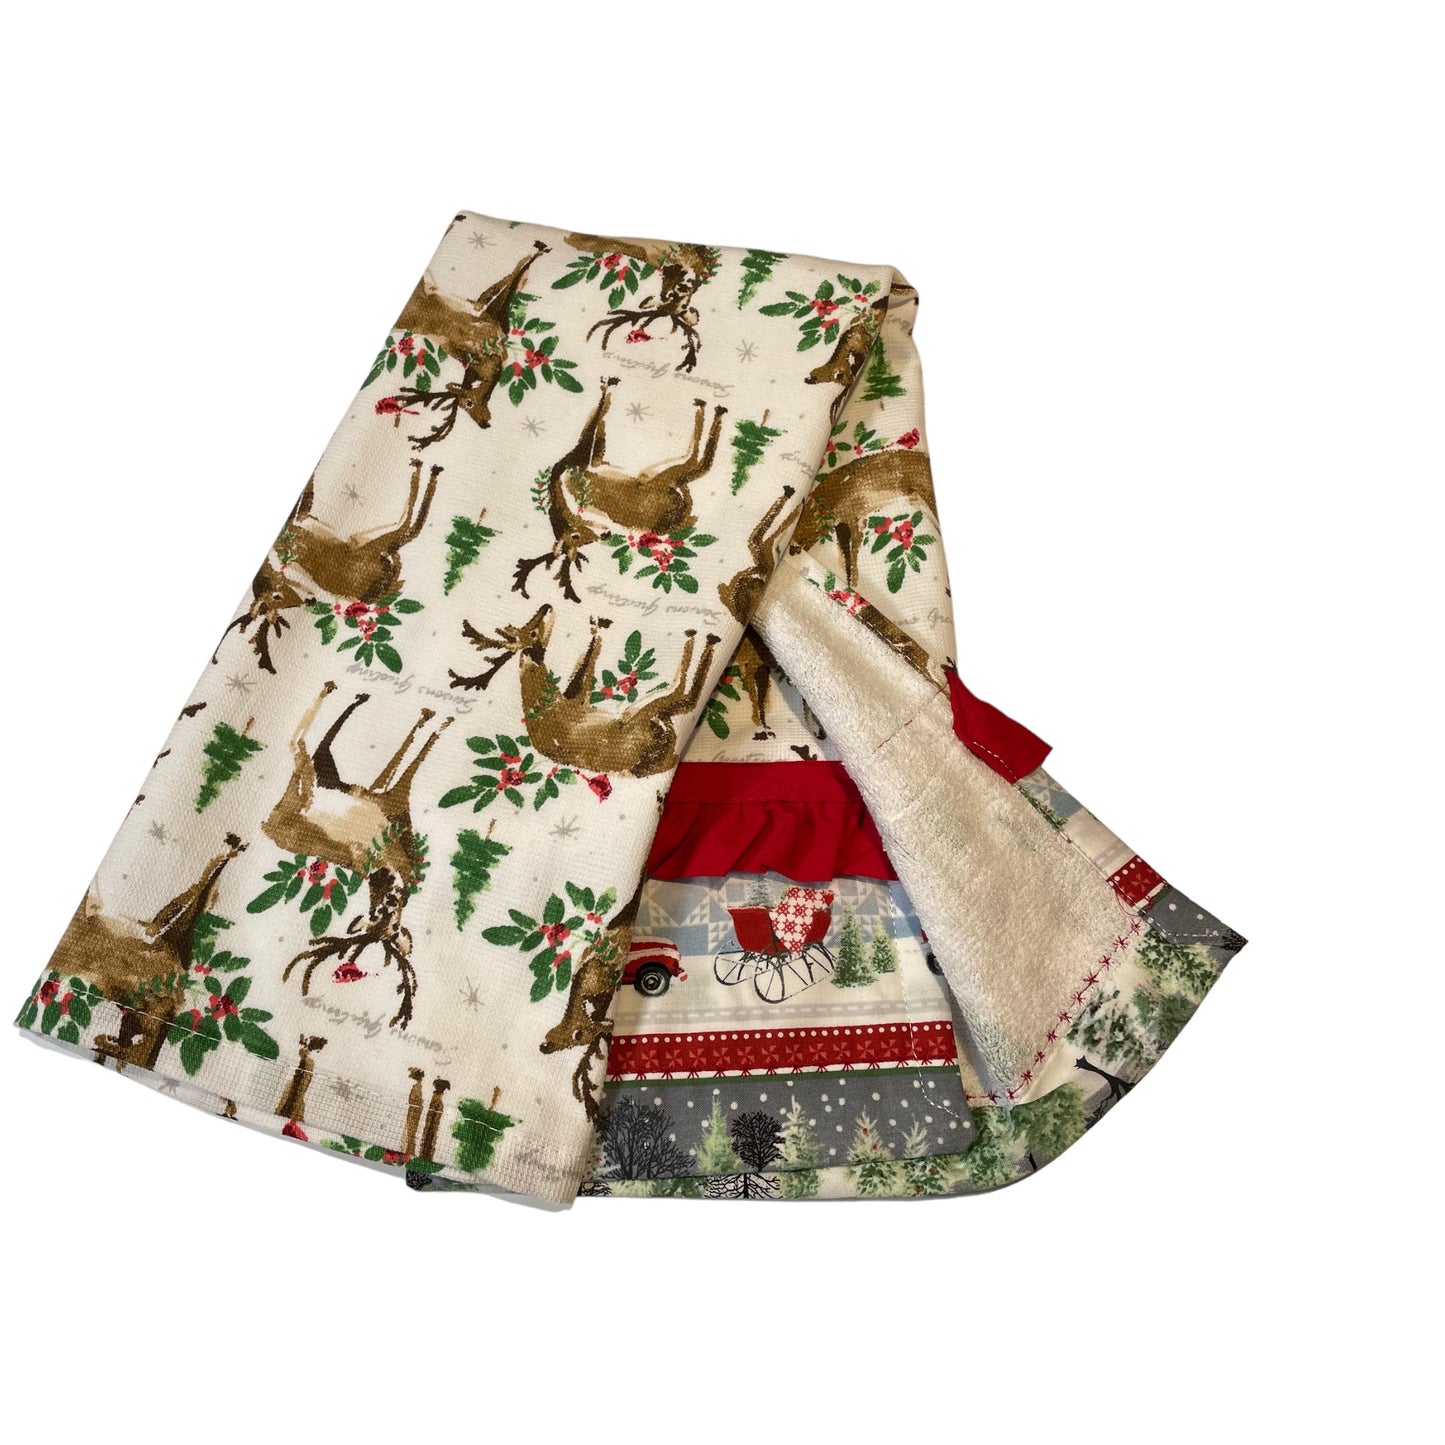 Handcrafted Christmas Reindeer Kitchen Tea Towel with Embroidery Stitching and Red Frilled Trim